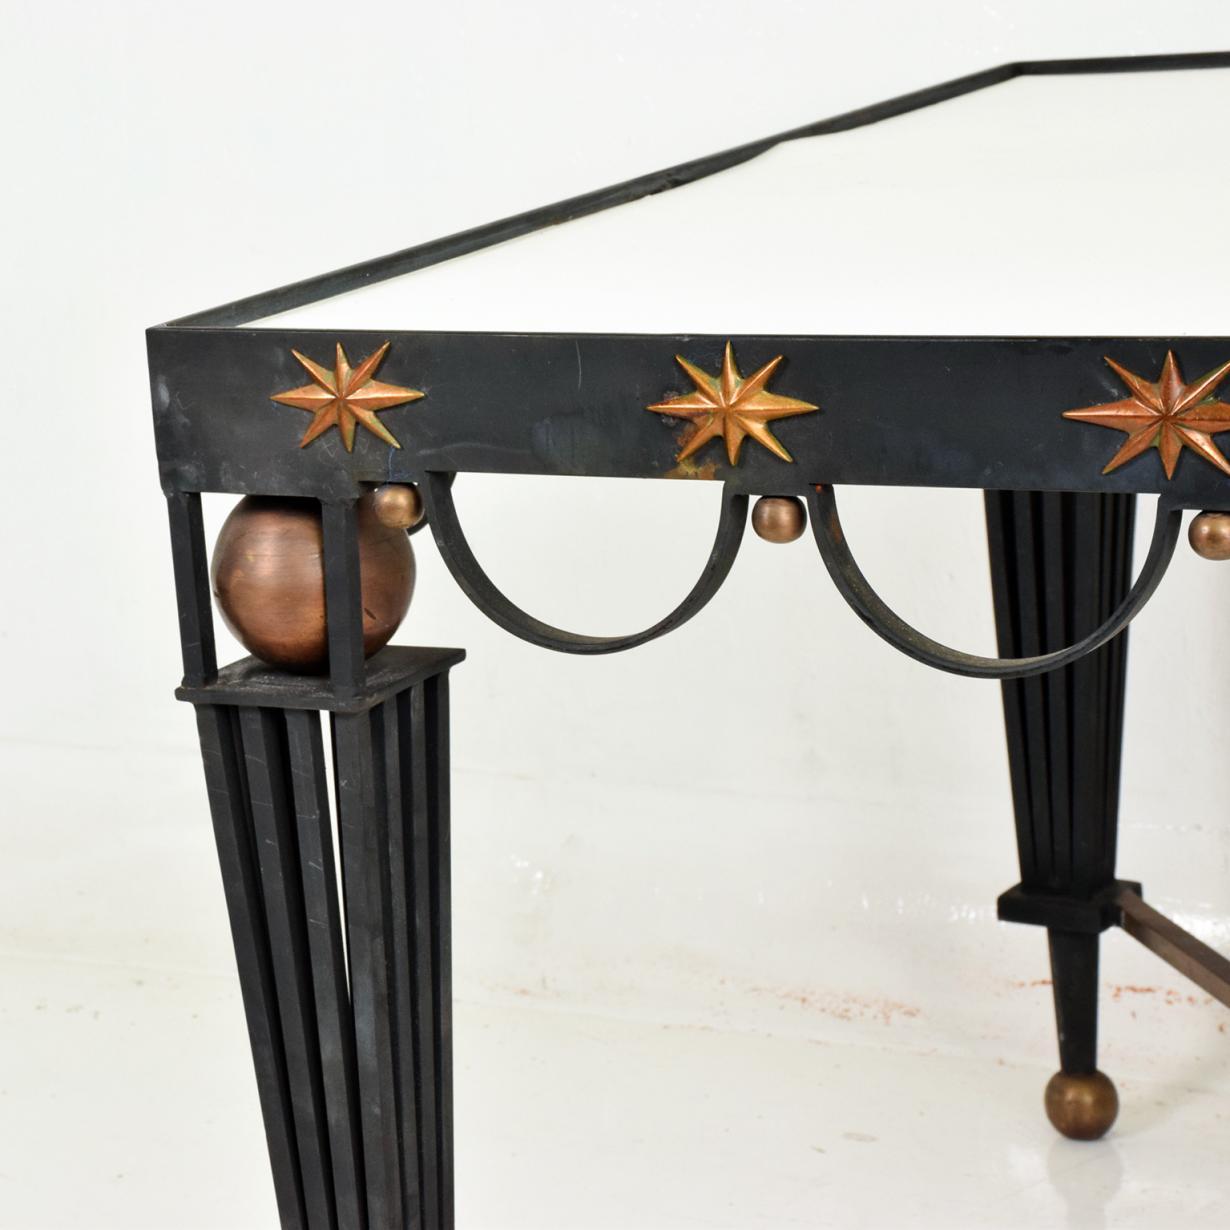 Central American Midcentury French Modernist Star Dining Table Attributed to Arturo Pani